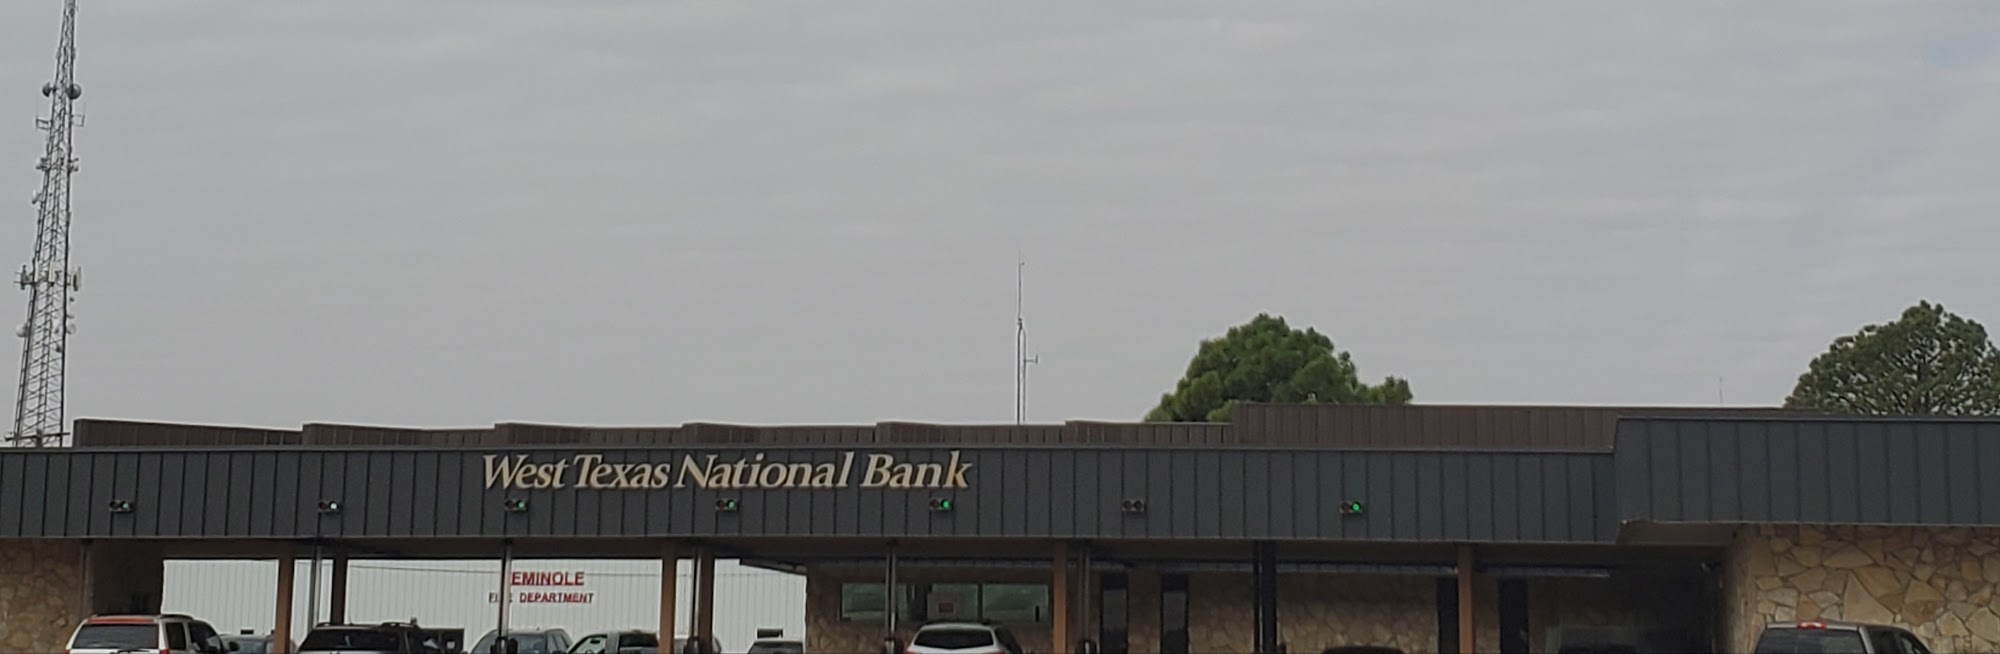 West Texas National Bank